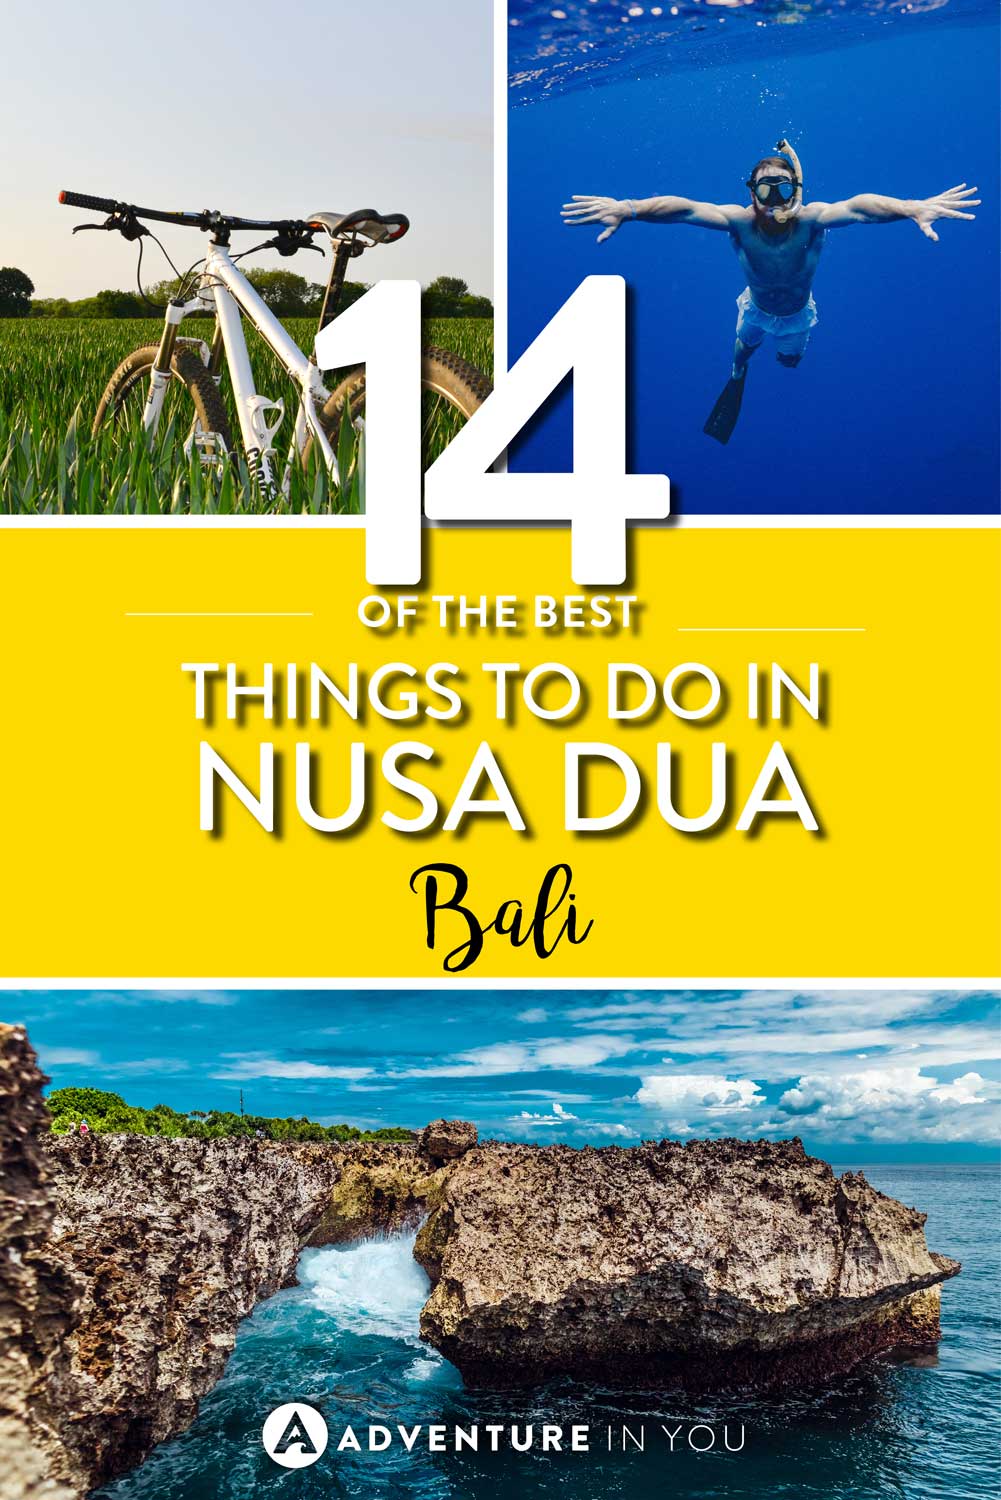 Nusa Dua Bali | Planning a trip to Nusa Dua, Bali? Here are my top recommendations on things to do in Nusa Dua. From exploring the beaches to visiting temples, Nusa Dua has plenty of things to do.